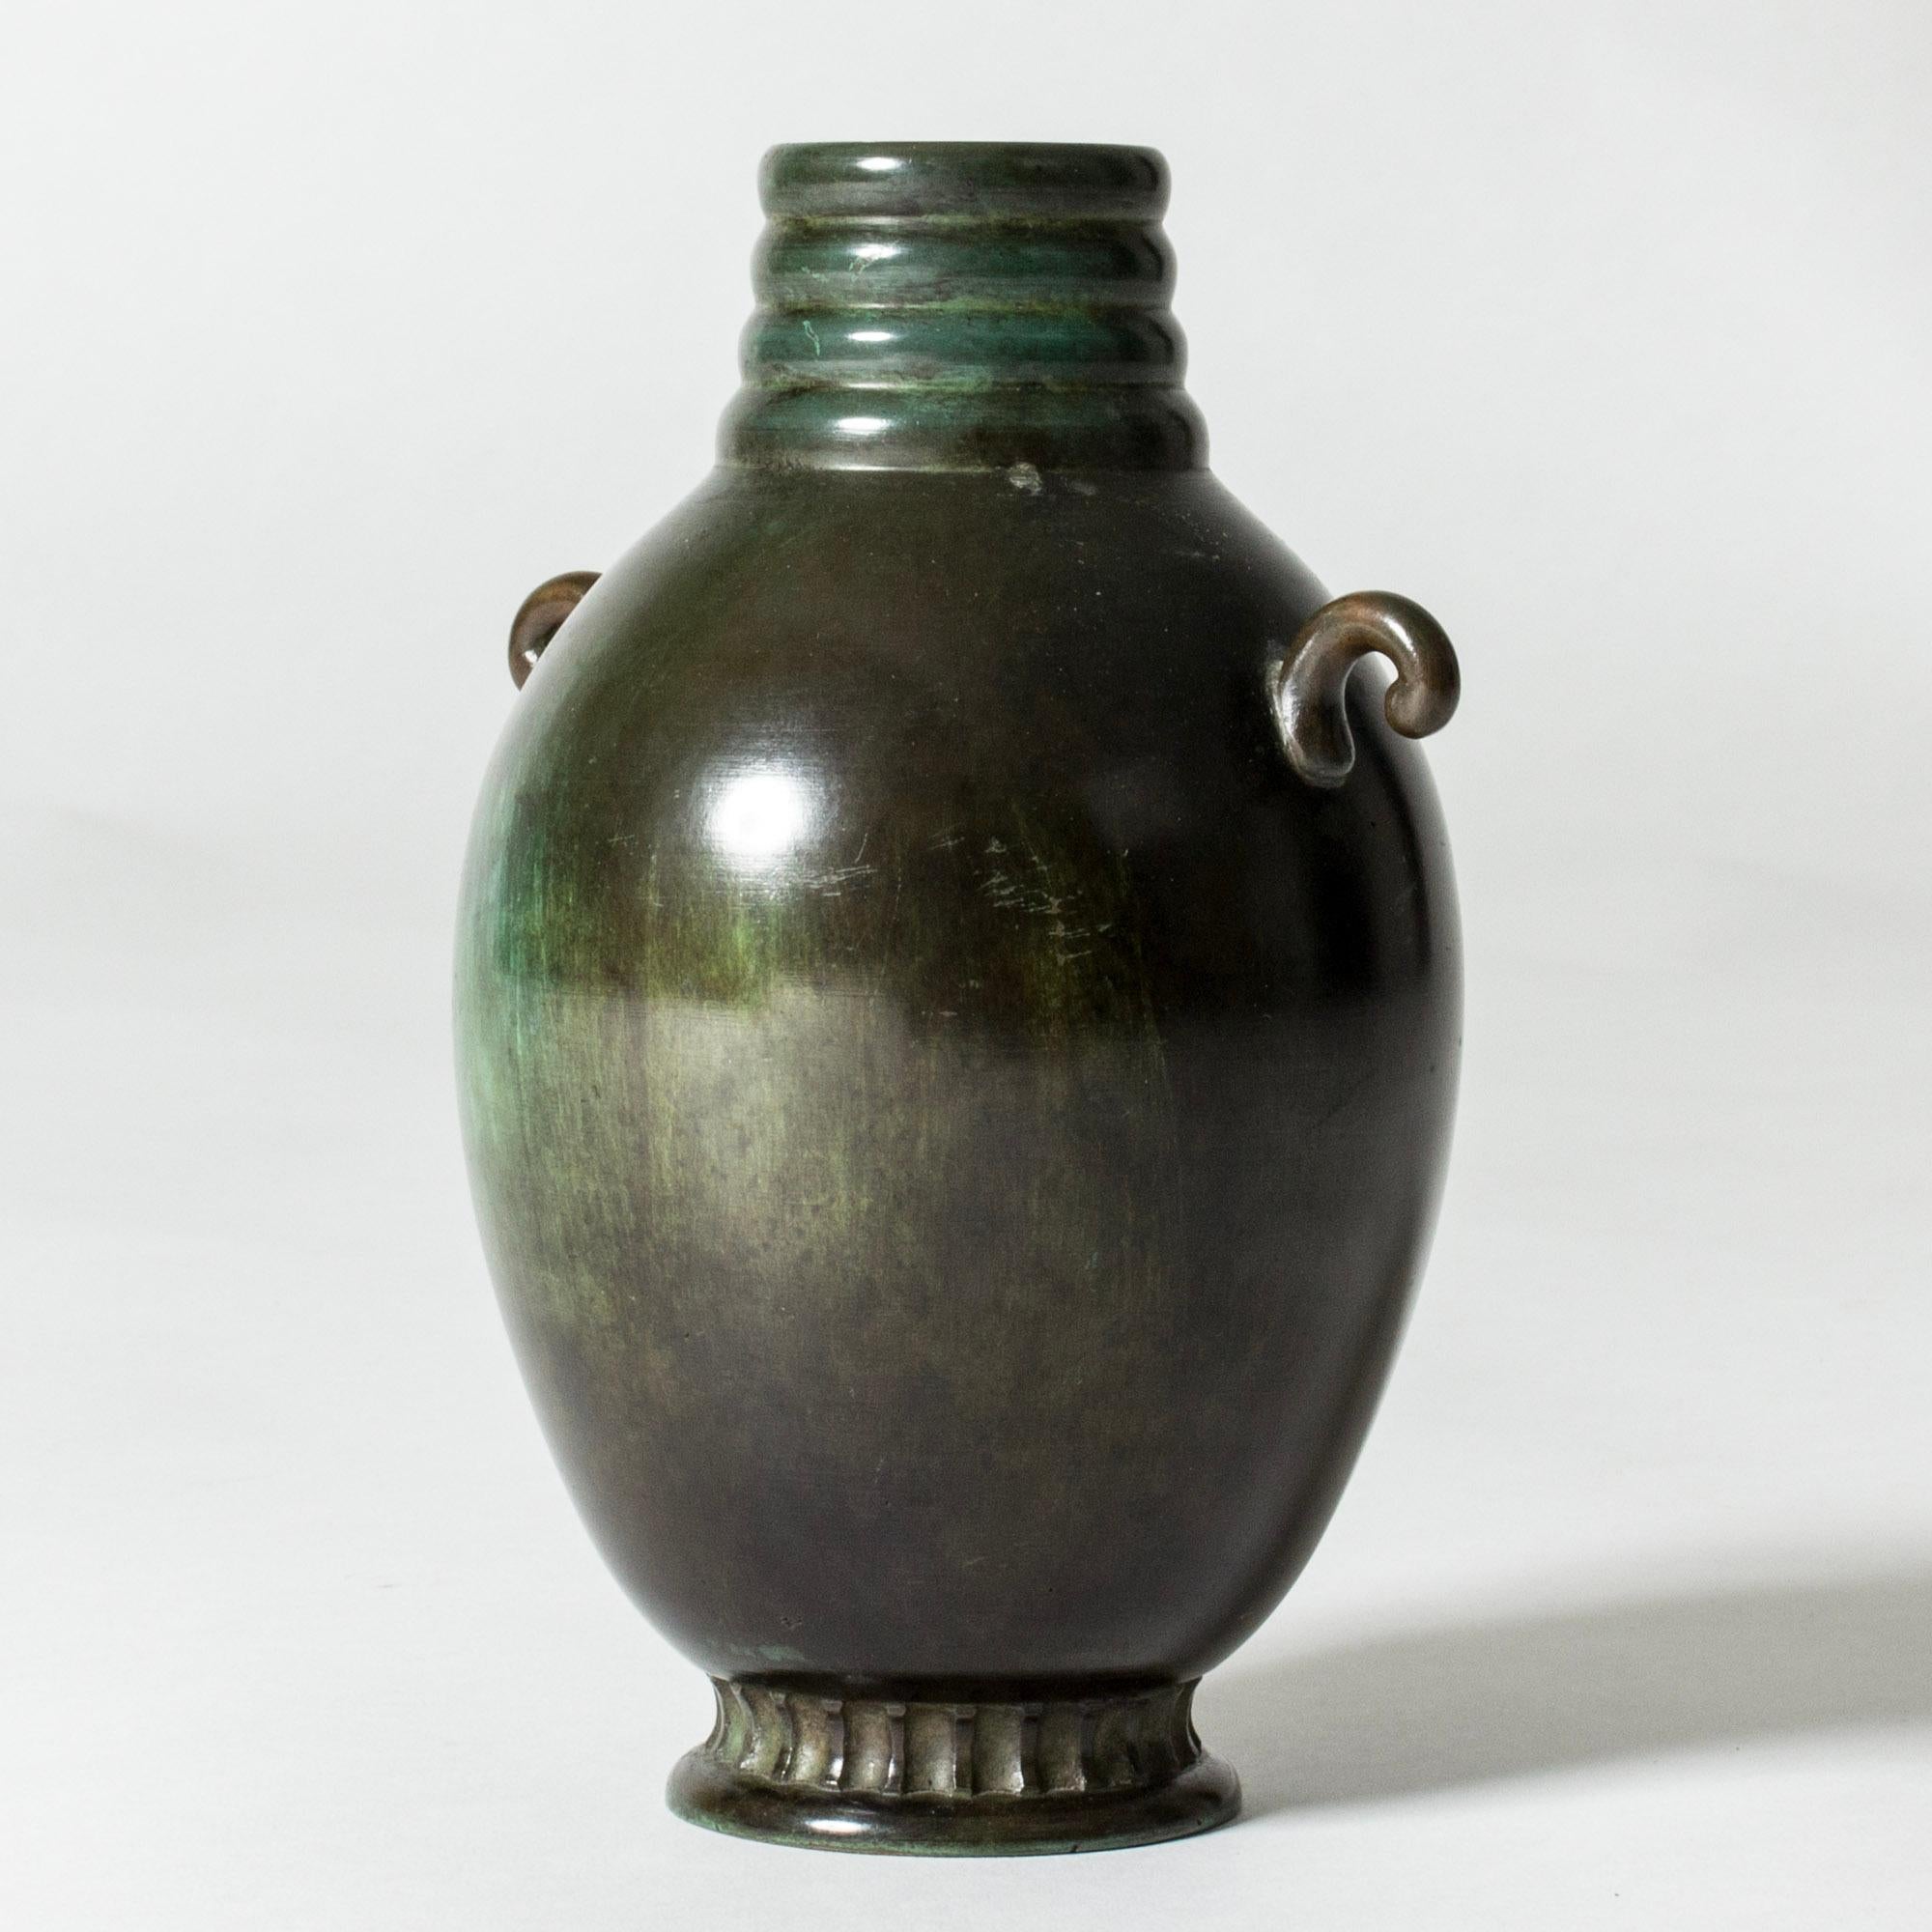 Lovely 1930s bronze vase, in a plump form with decorative handles and details. Patinated in beautiful green nuances.

GAB was founded in Stockholm in 1867 and was an important influence on the Swedish art and crafts and industrial design scenes for